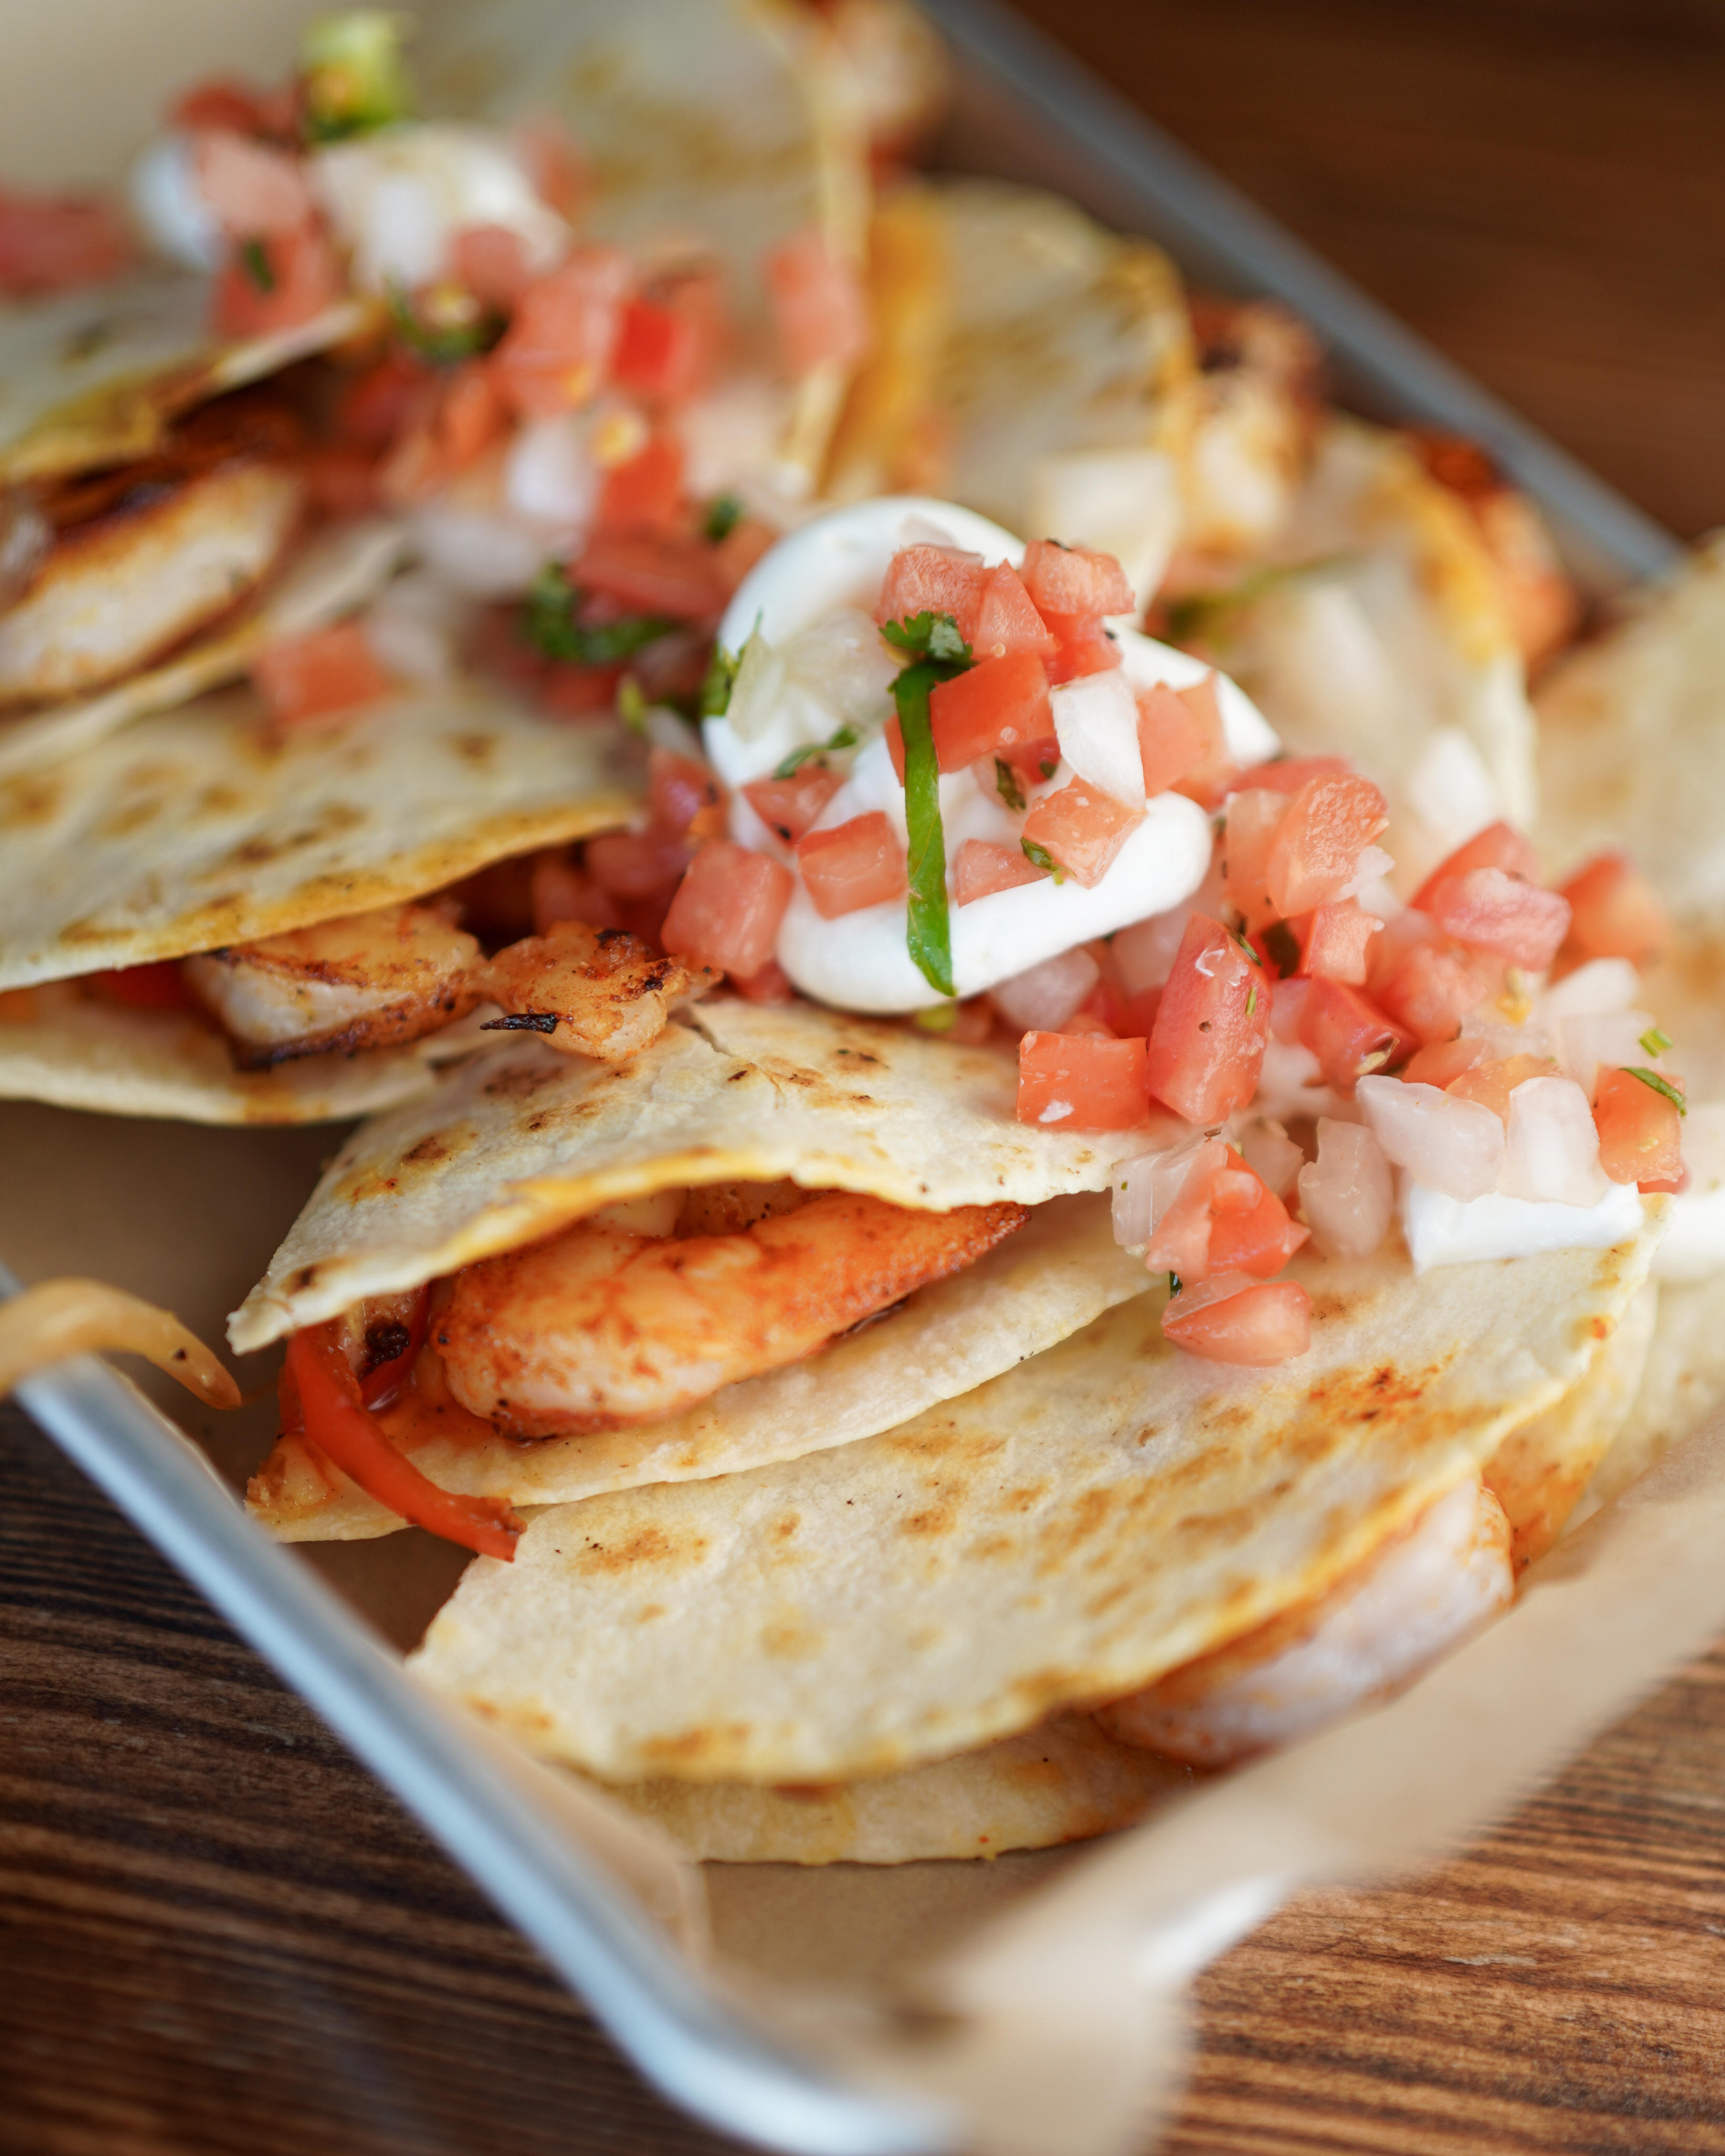 QUESADILLA - Your choice of sautéed shrimp or grilled chicken, with onions, bell peppers and nacho c Joey’s Seafood Restaurants Saskatoon (306)955-5858